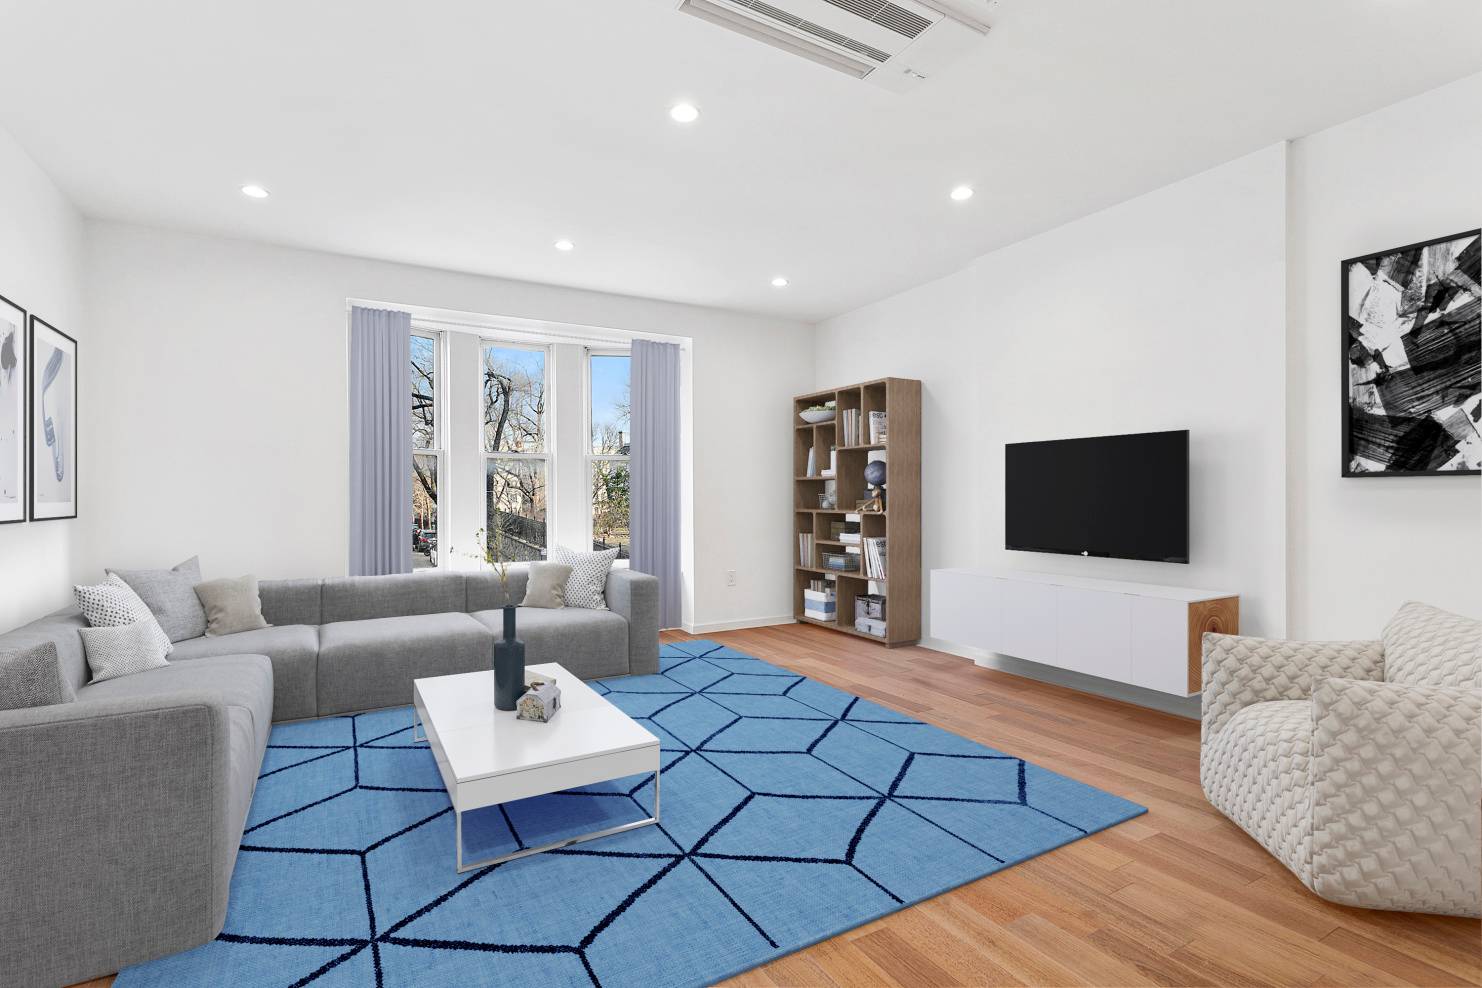 Jumel Mansion Condominium Landmark Warmth Meets Modern Luxury Tranquility and elegance in this landmarked enclave designated, The Jumel Terrace Historic District Manhattan's majestic Morris Jumel mansion is a stone throw ...